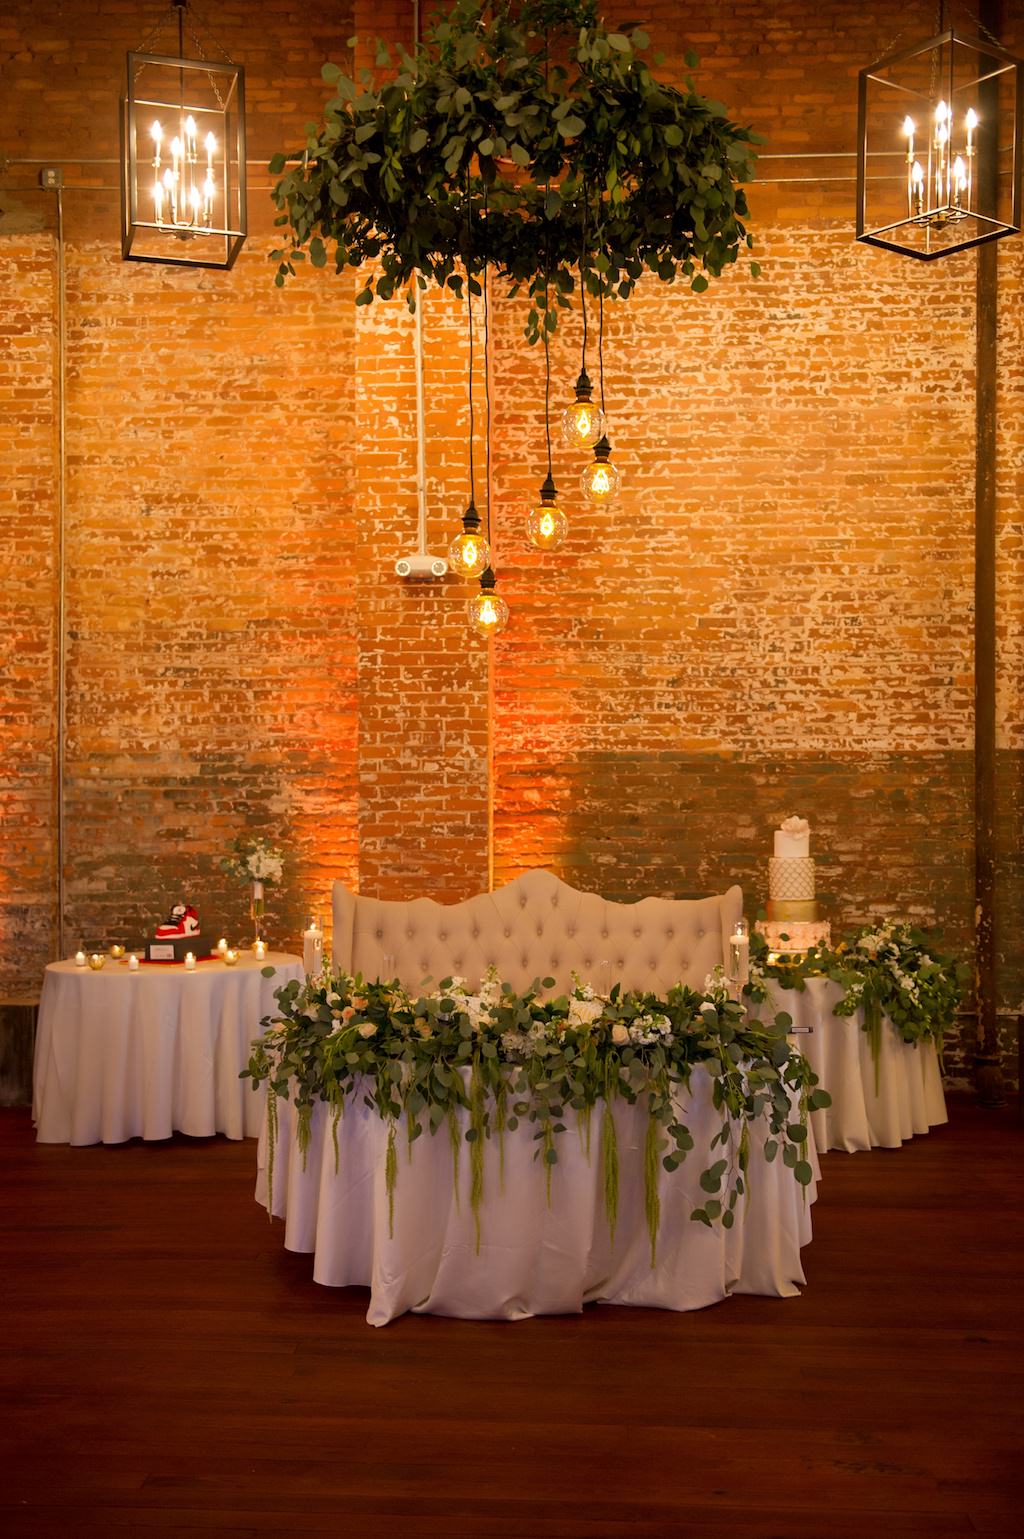 Industrial Chic Wedding Reception Decor, Sweetheart Table with White Tablecloth, Greenery and White Floral Garland, Off White Loveseat Lounge Seat, Greenery Chandelier | Tampa Bay Wedding Photographer Andi Diamond Photography | Unique Industrial Tampa Wedding Venue Armature Works